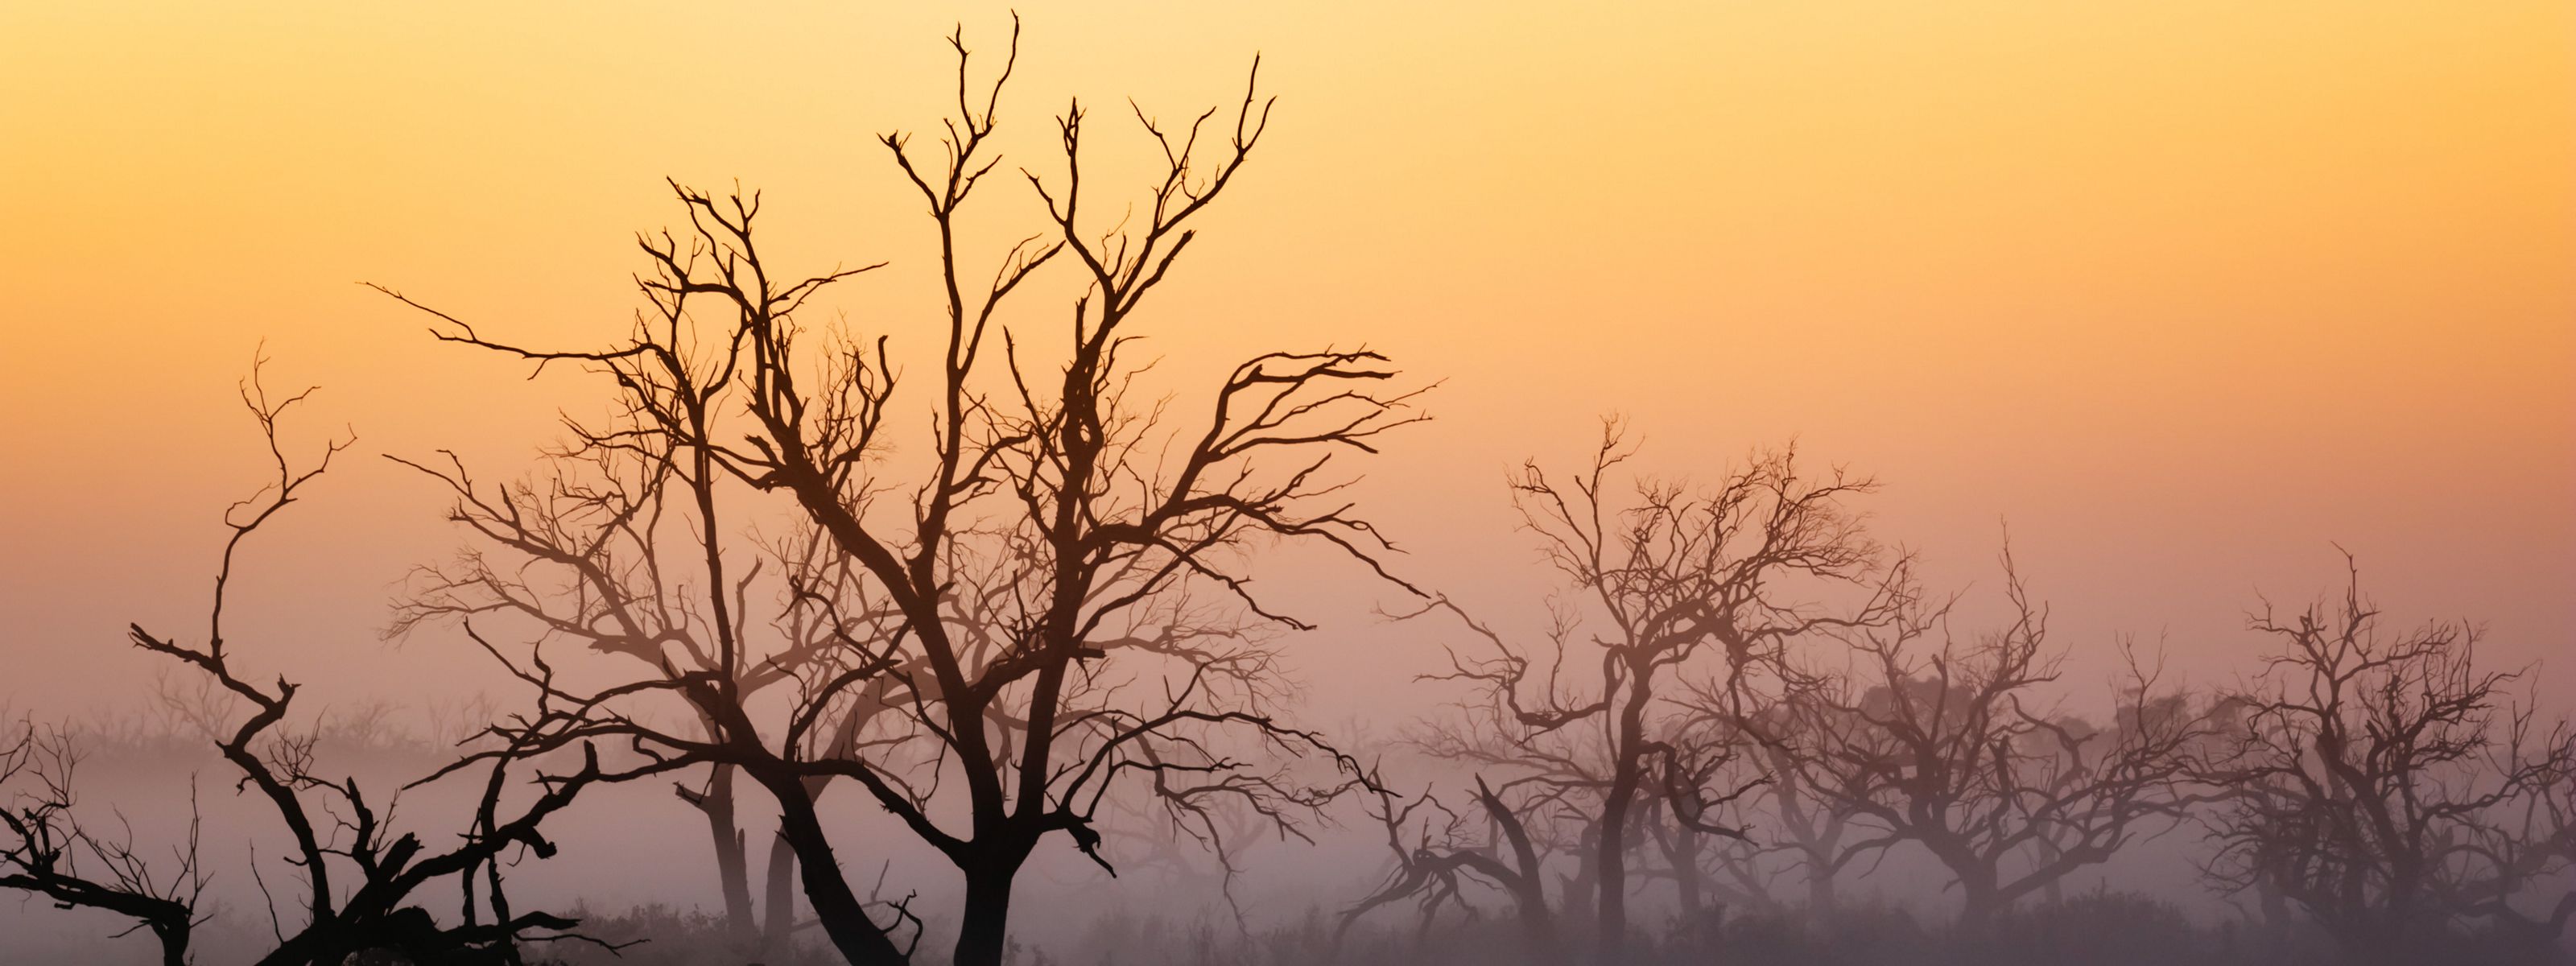 Gnarly trees are silhouetted against an orange sky while mist rises from the ground.